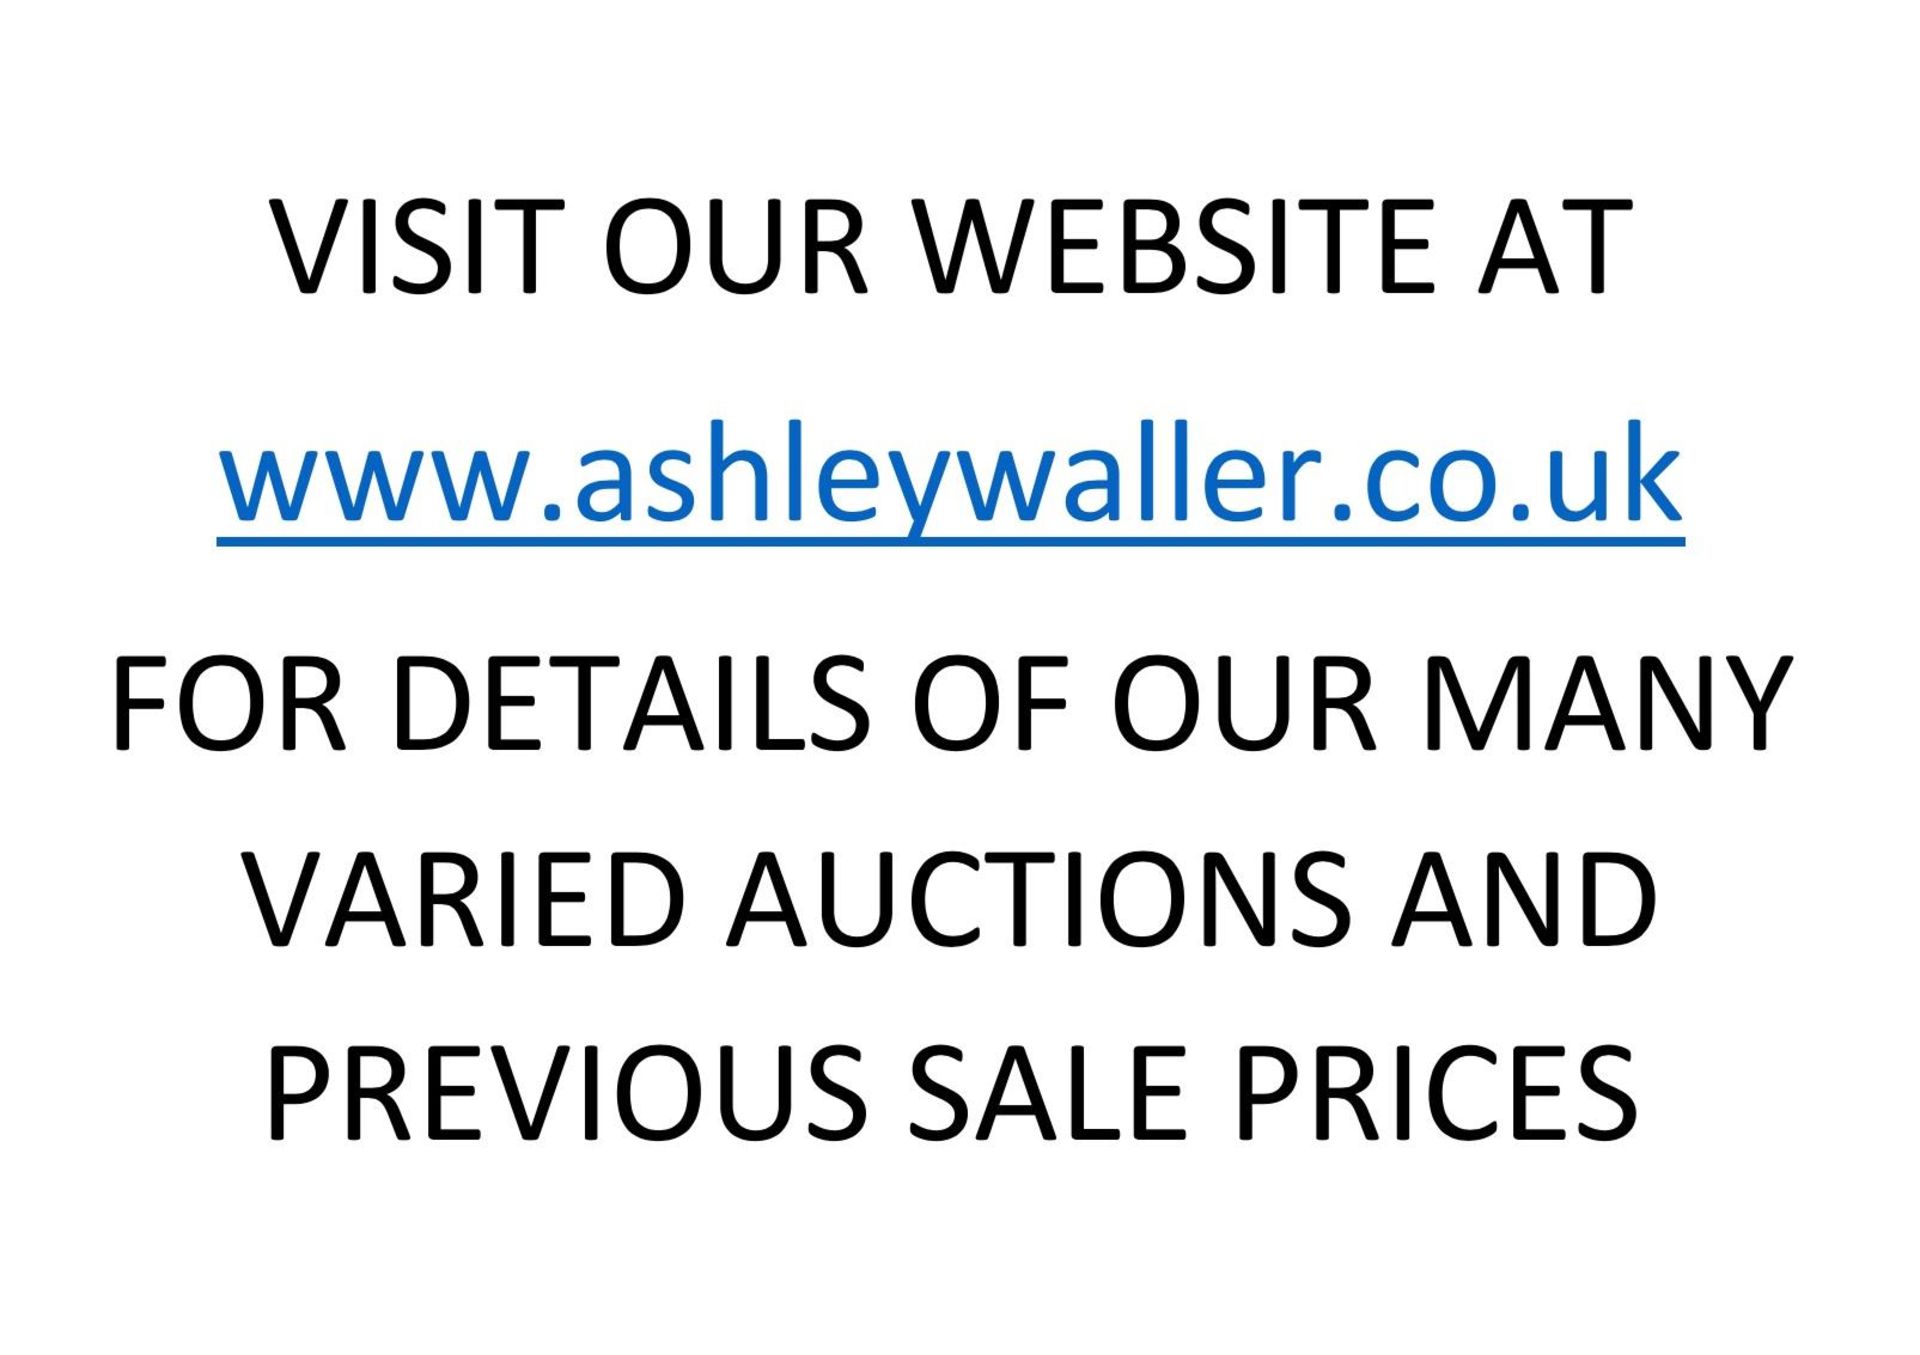 END OF SALE. THANK YOU FOR YOUR BIDDING, OUR NEXT MONTHLY MACHINERY AUCTION IS TUESDAY 20TH